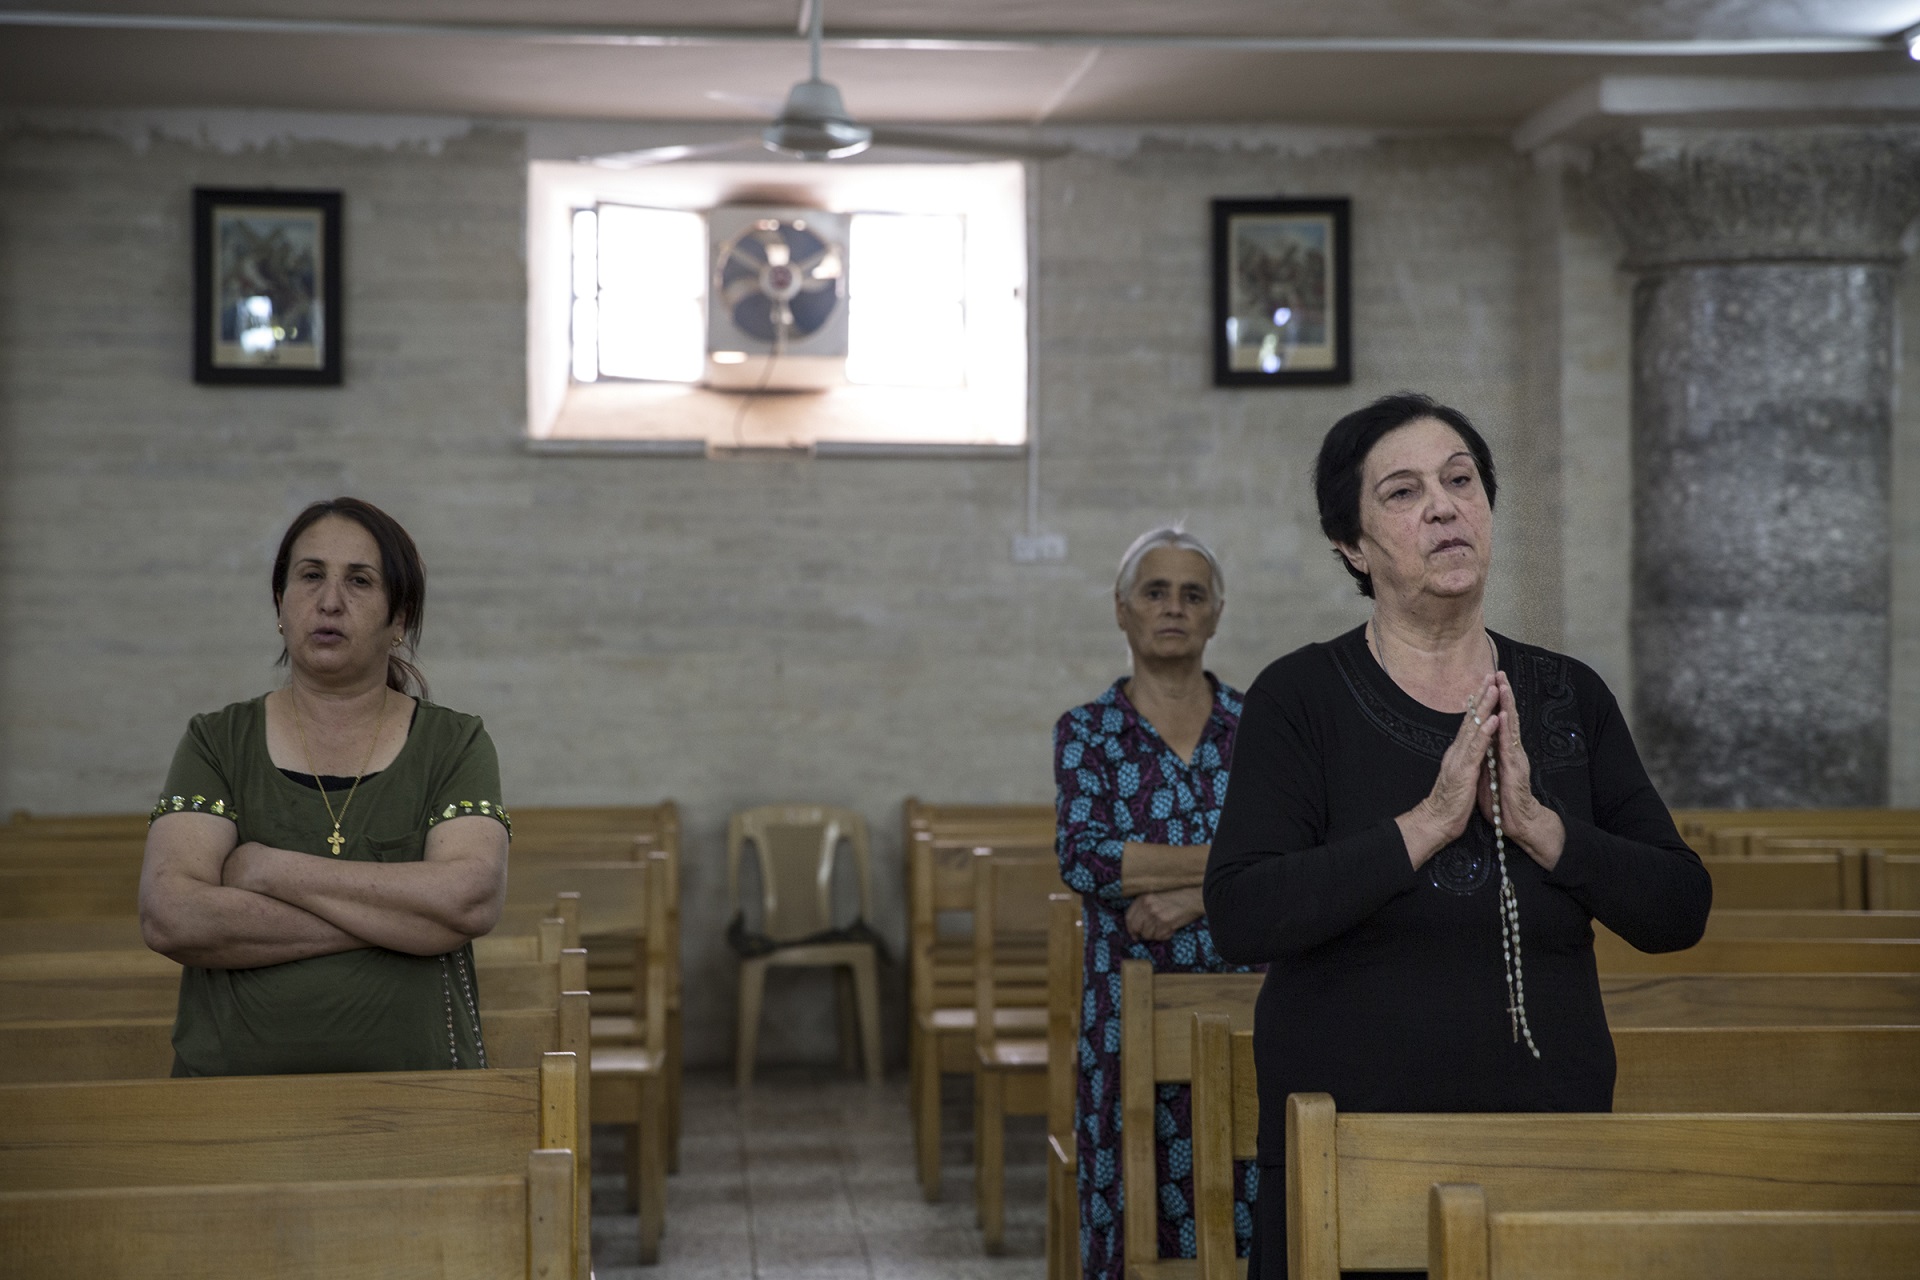 (RNS2-oct27) Afternoon prayer at the St. George Church in the historic Assyrian Christian town of Alqosh in the Nineveh Plain of Iraqi Kurdistan. Locals adhere to the Chaldeon Catholic religion. The town was nearly overrun by Islamic fighters earlier this summer, when Peshmerga forces withdrew their forces, abandoning the Christian town. Photo by Jodi Hilton